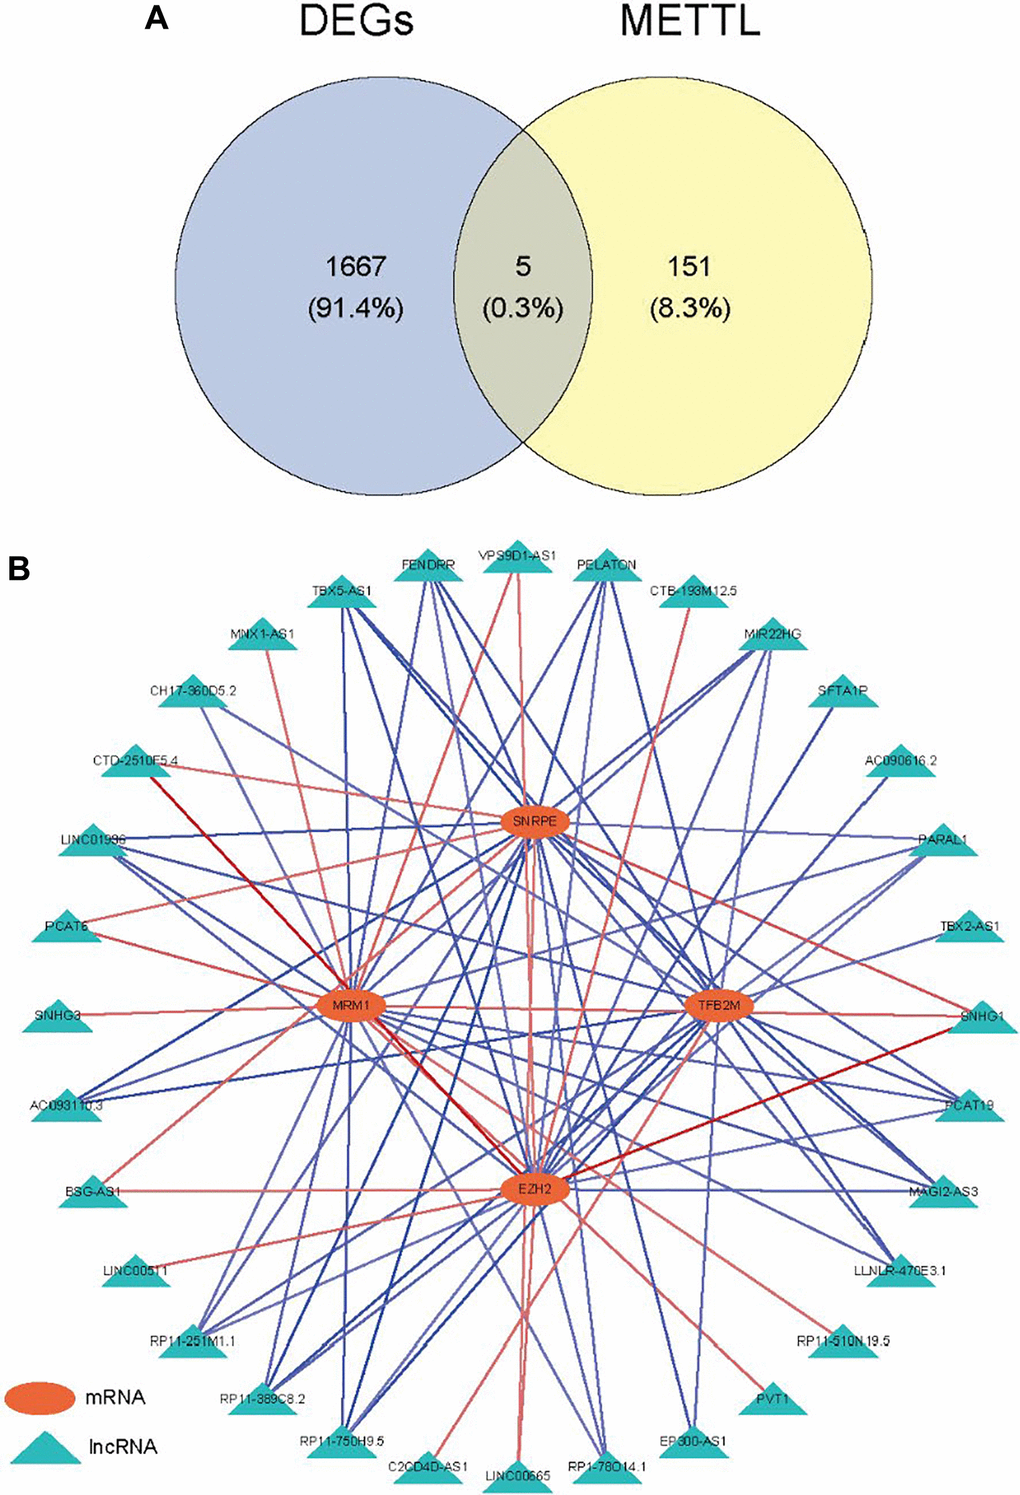 Identification of methyltransferase-related lncRNAs. (A) Venn diagram of the intersection between DEGs and methyltransferase-related genes; (B) The mRNA-lncRNA network.